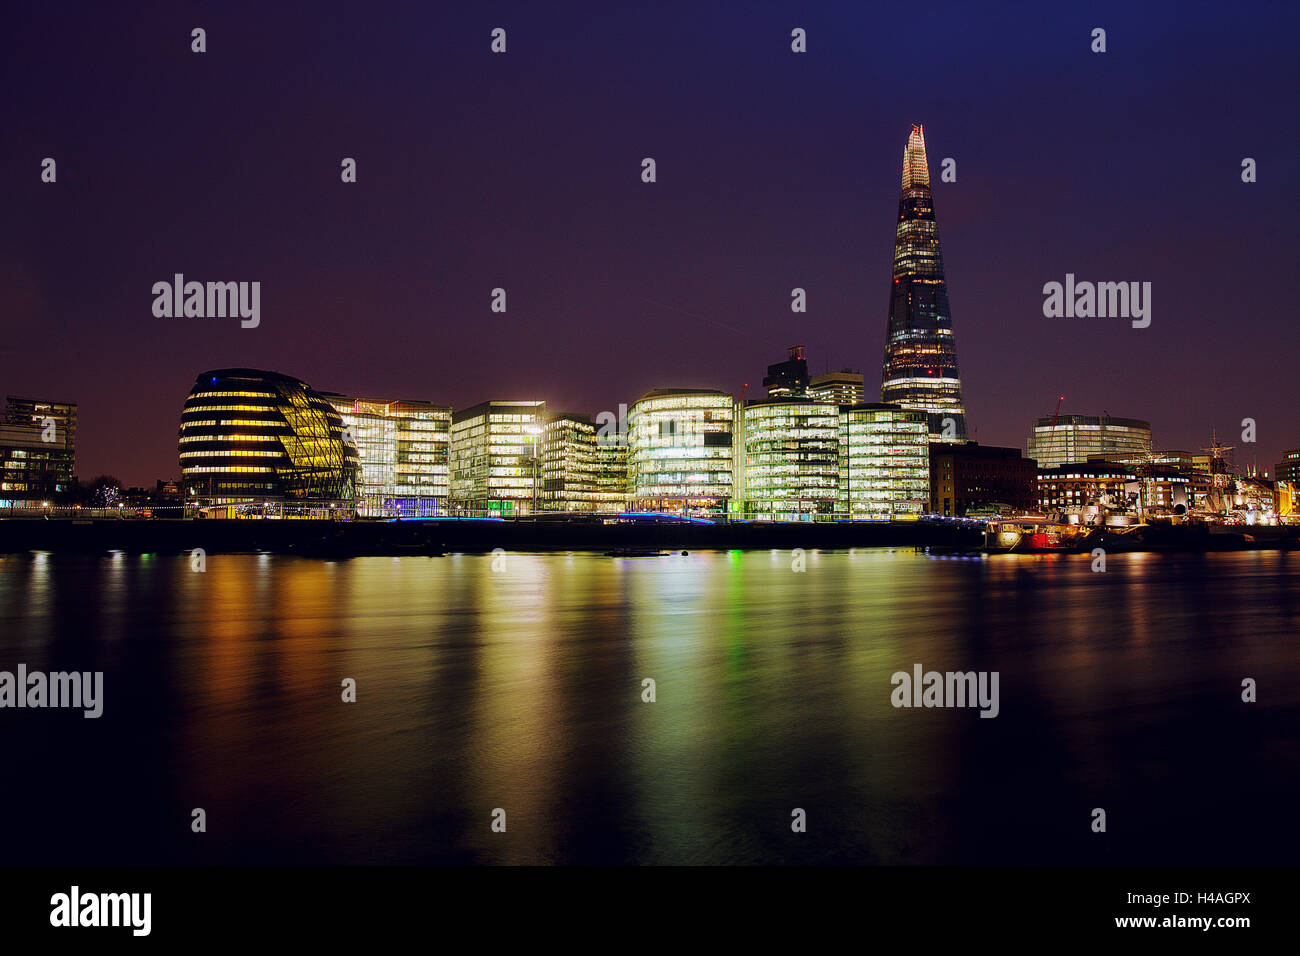 View over River Thames at night on city hall and Shard Stock Photo